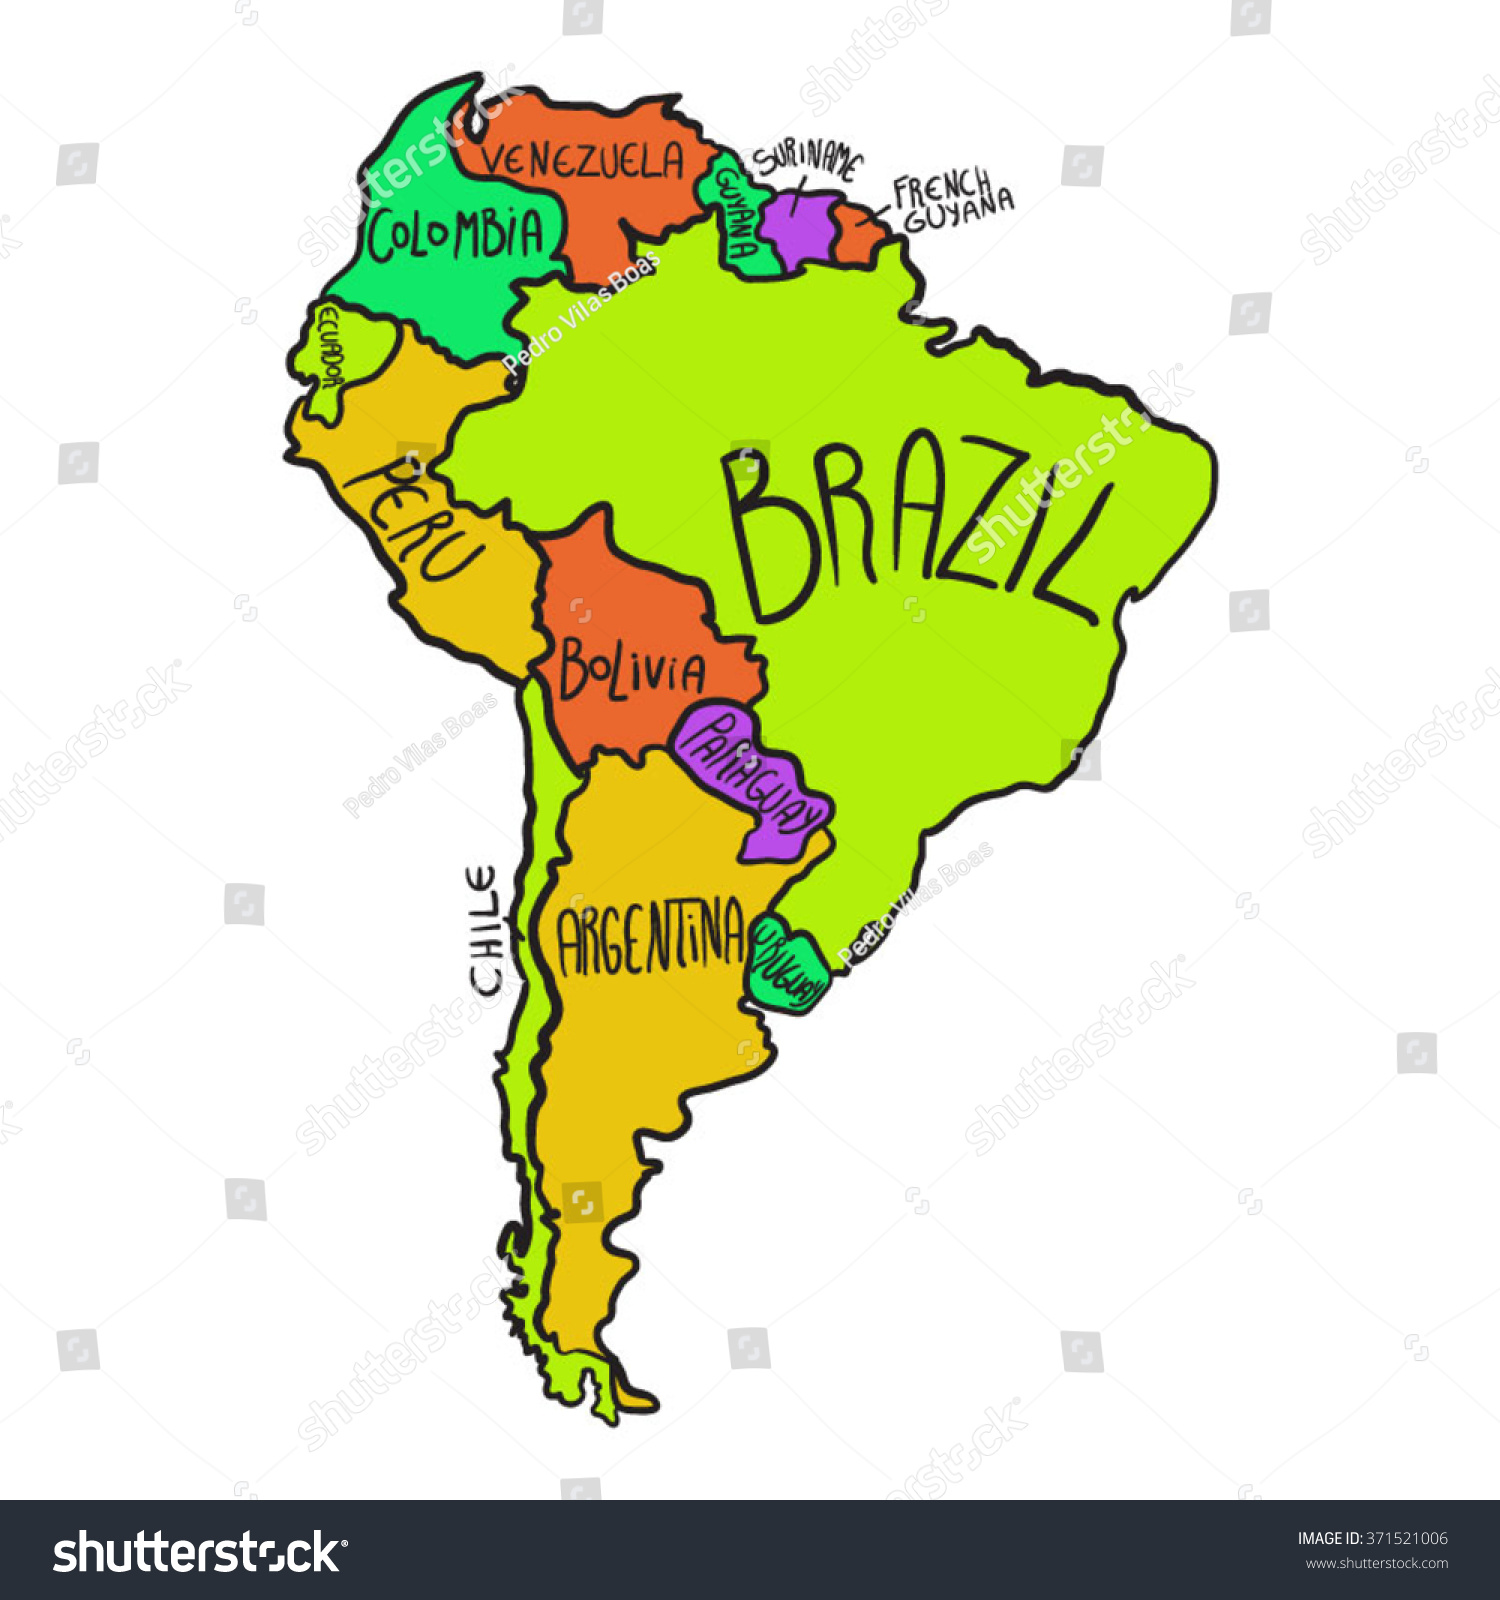 south america map clipart - photo #20